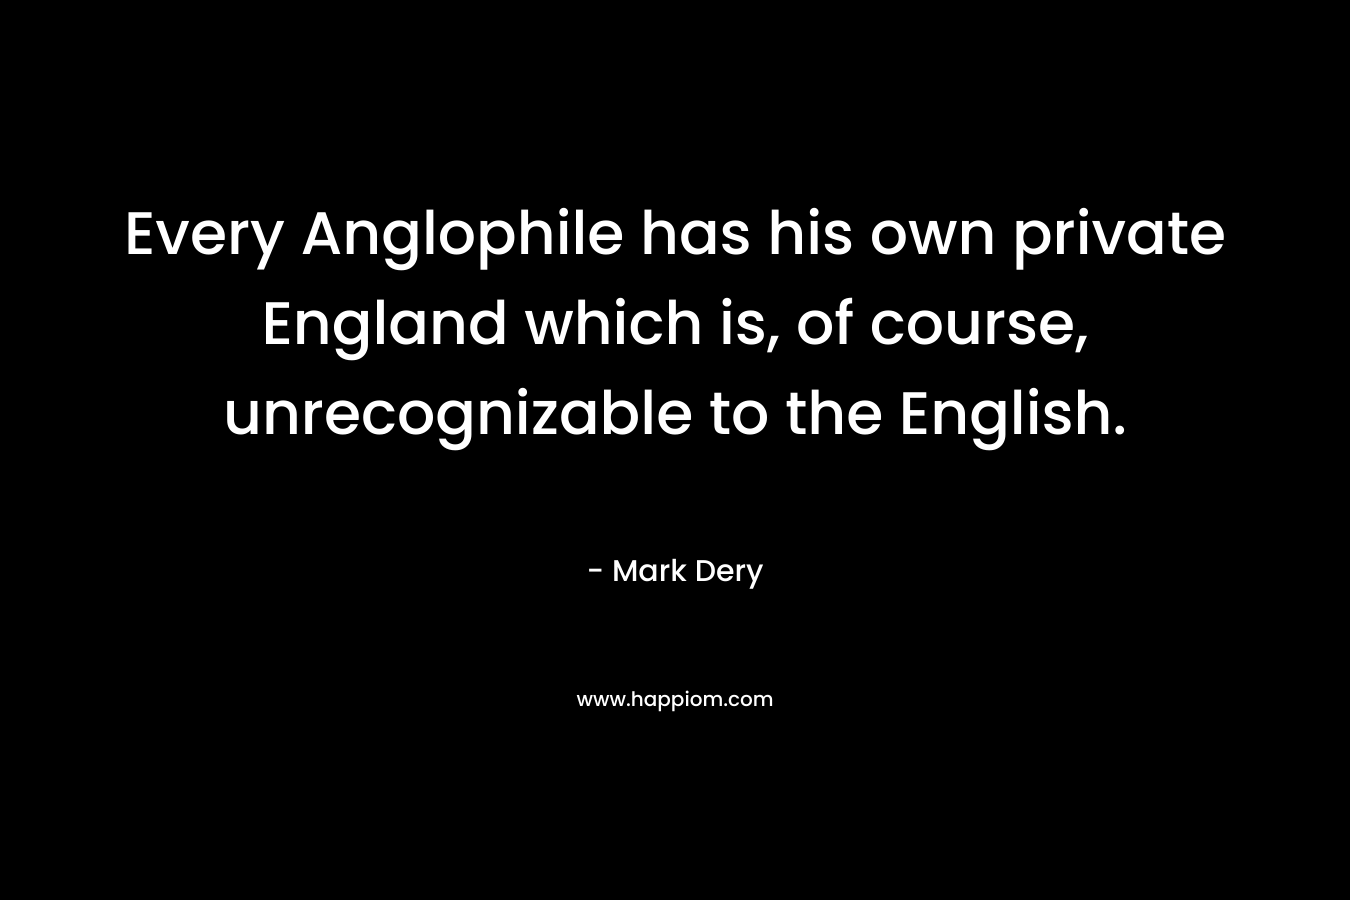 Every Anglophile has his own private England which is, of course, unrecognizable to the English.